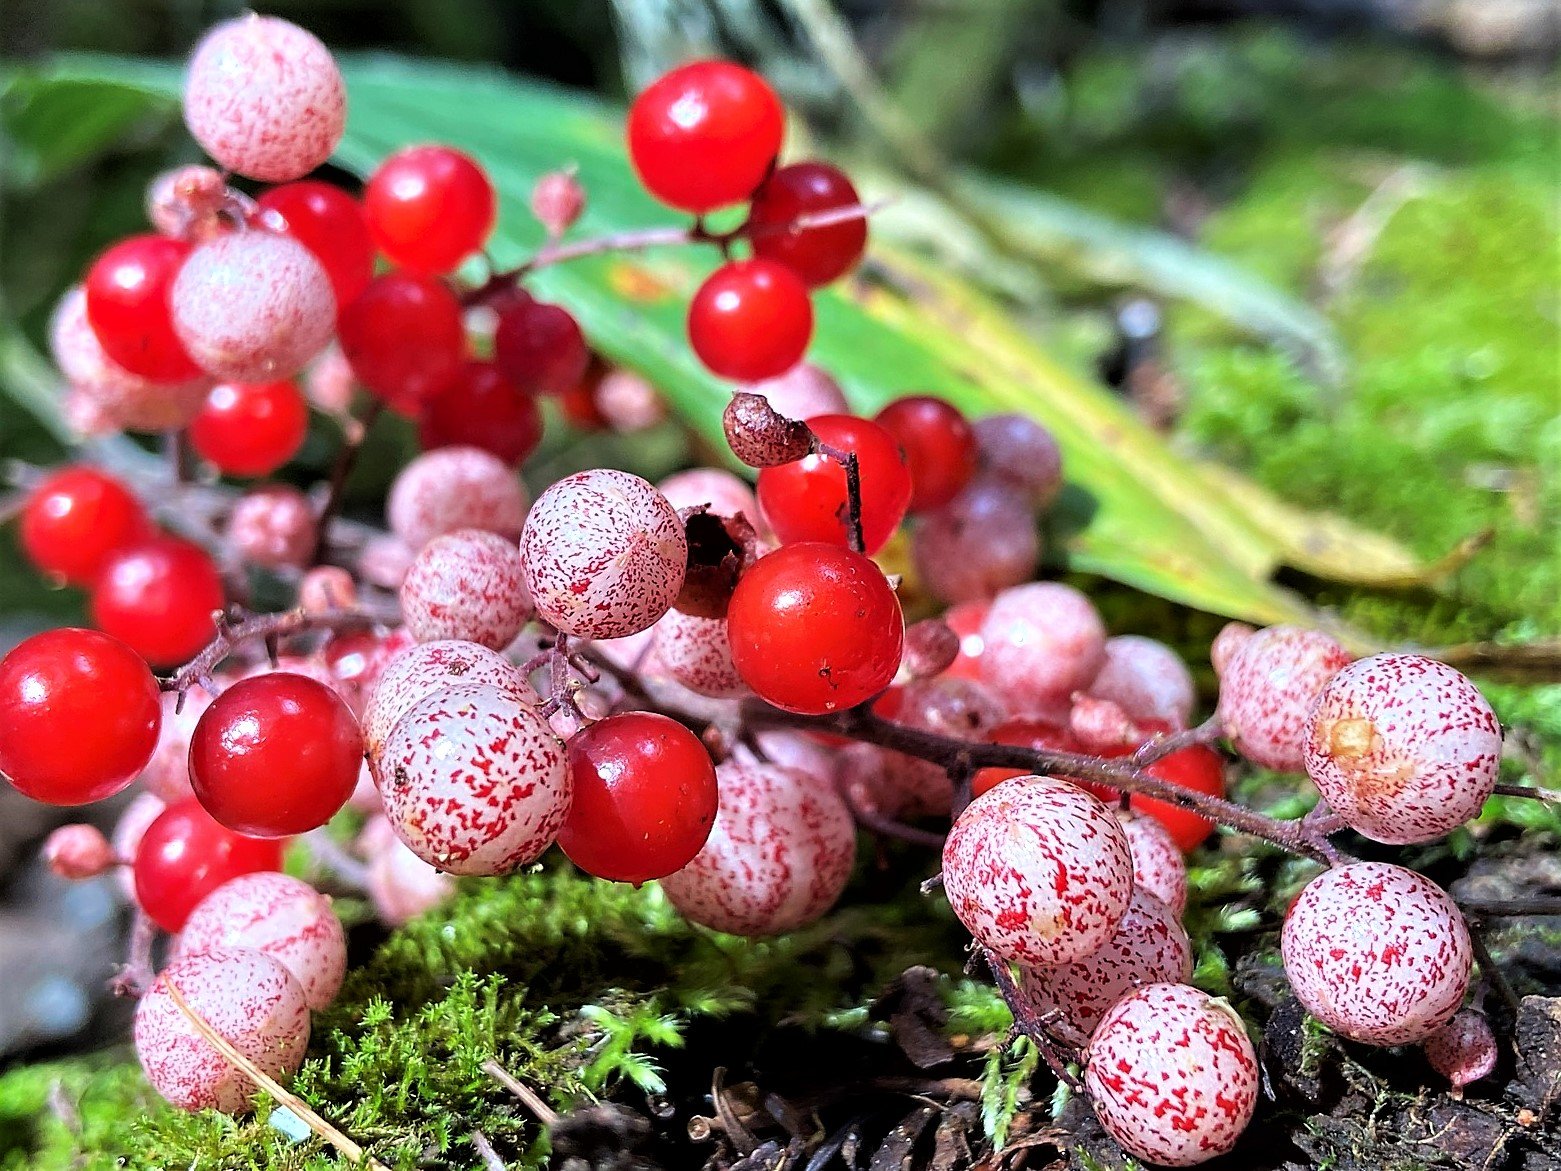 Edible fruits and berries (and some poisonous ones too) - Jack Raven  Bushcraft